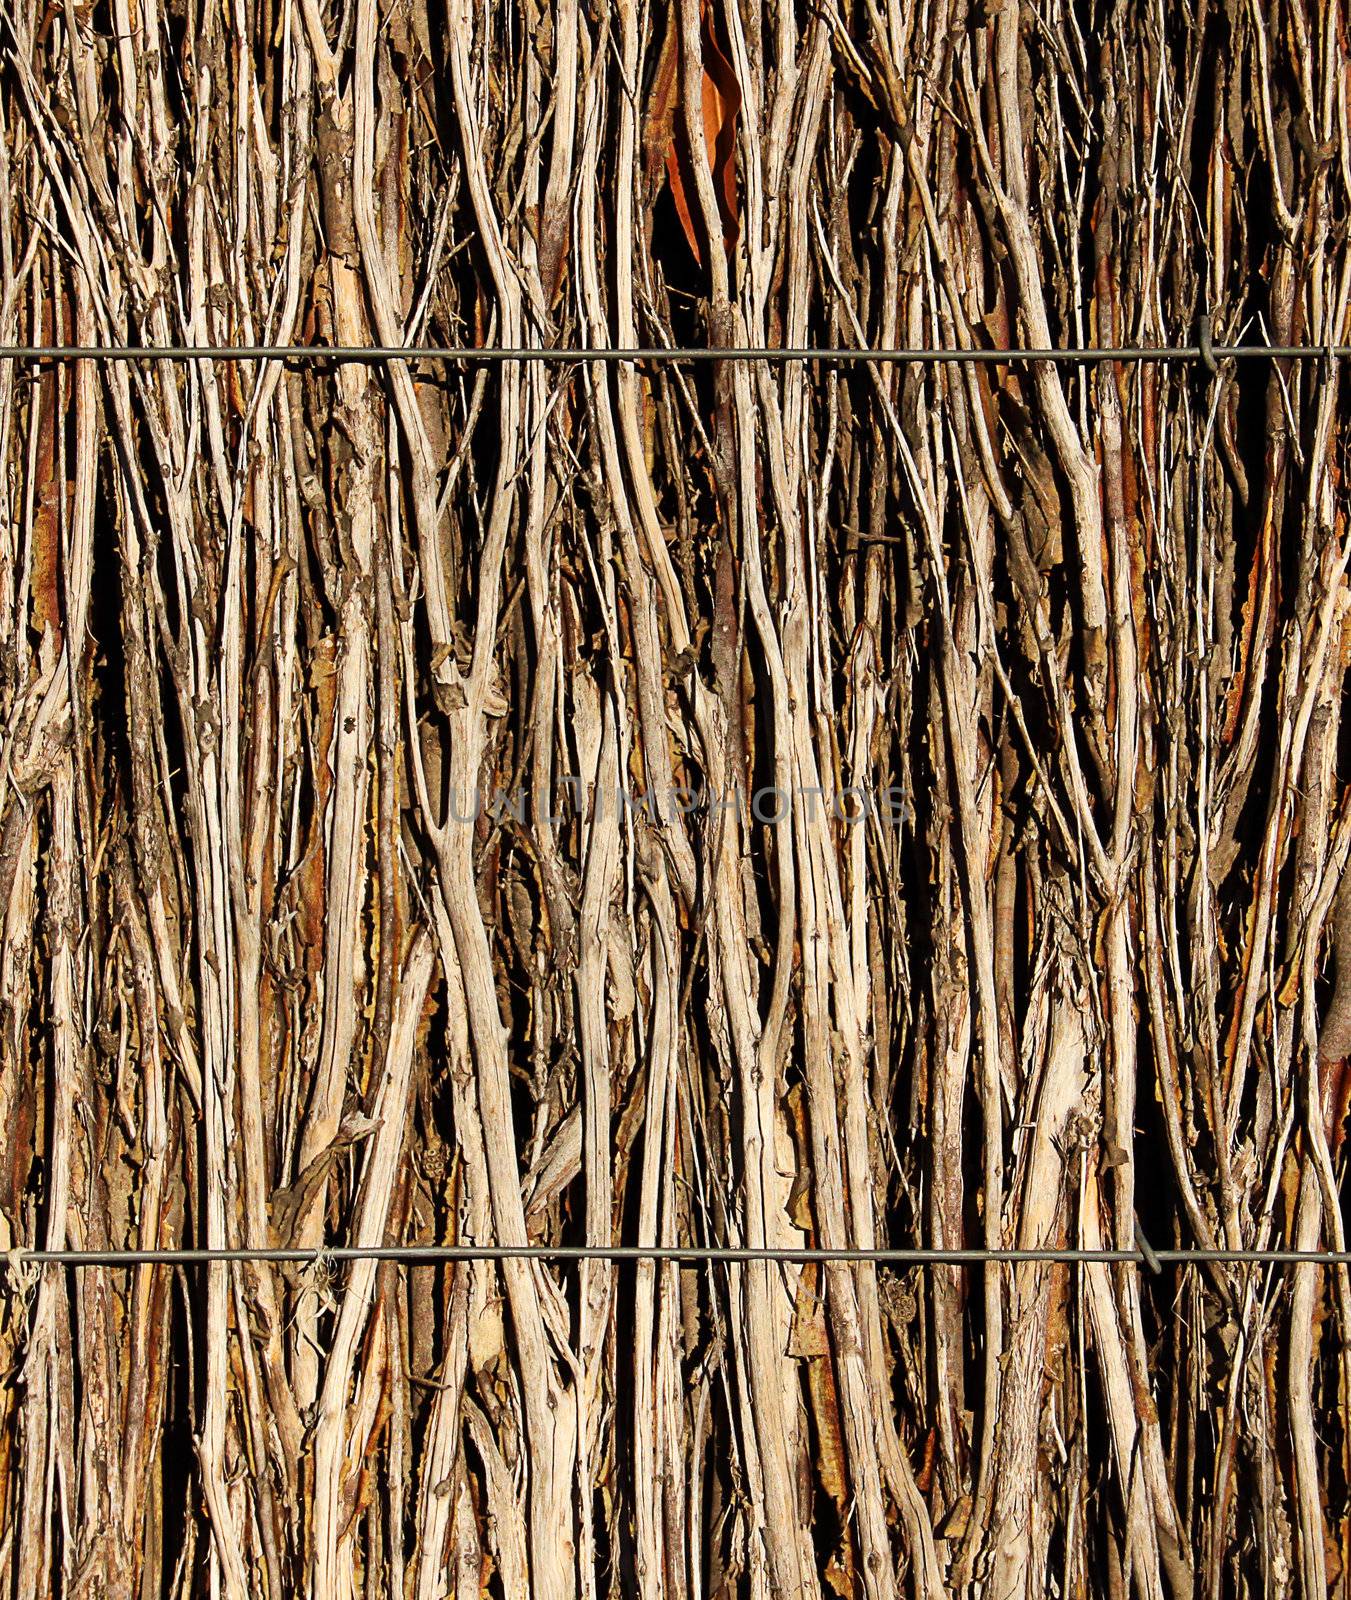 Sticks within a Brush Fence Background by Cloudia